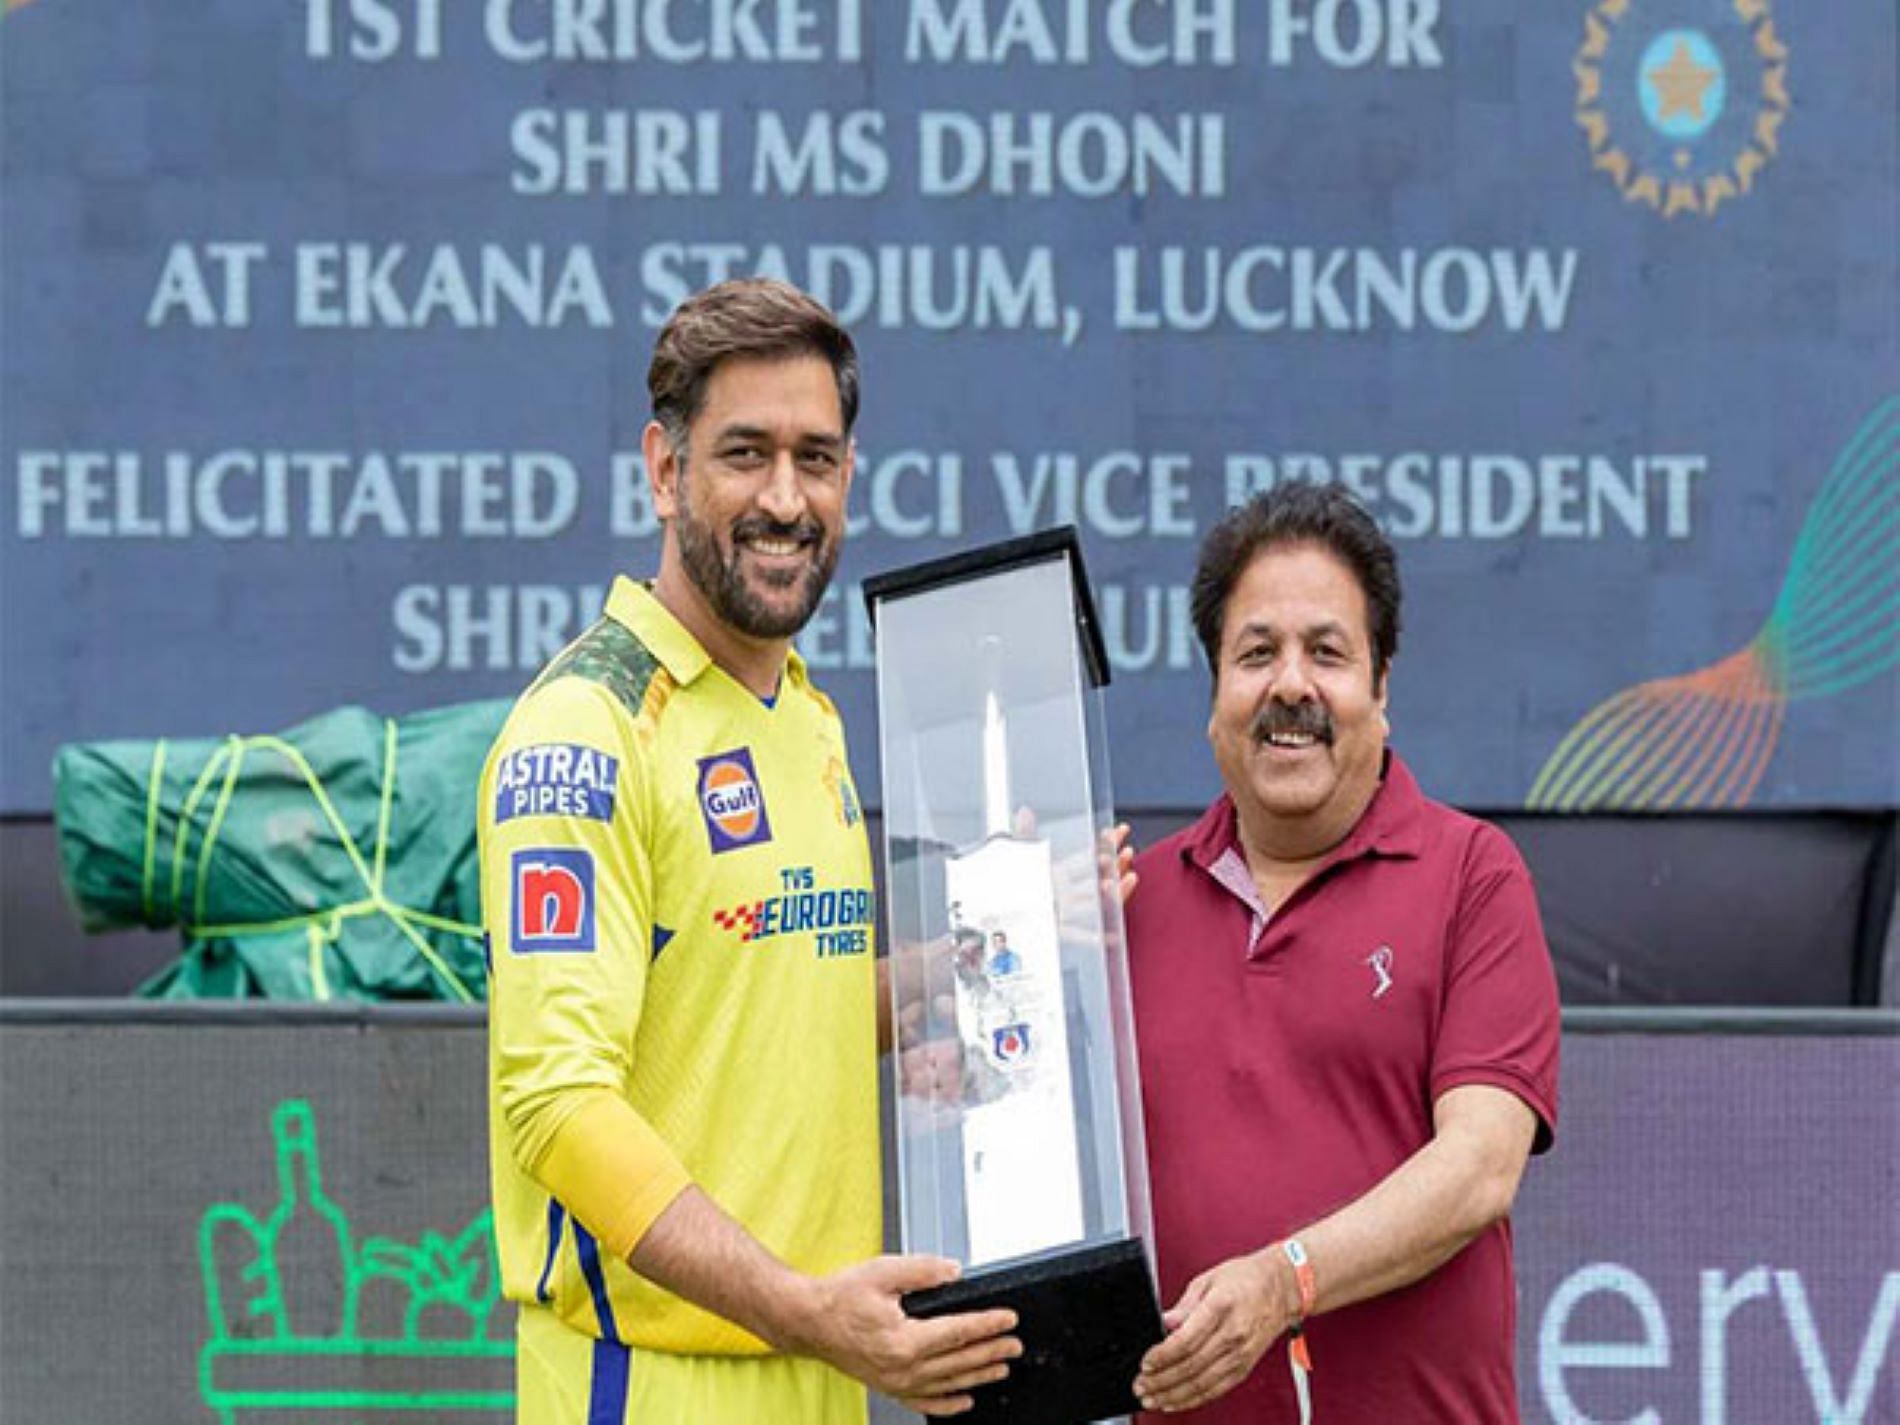 MS Dhoni was felicitated ahead of his first match at Lucknow